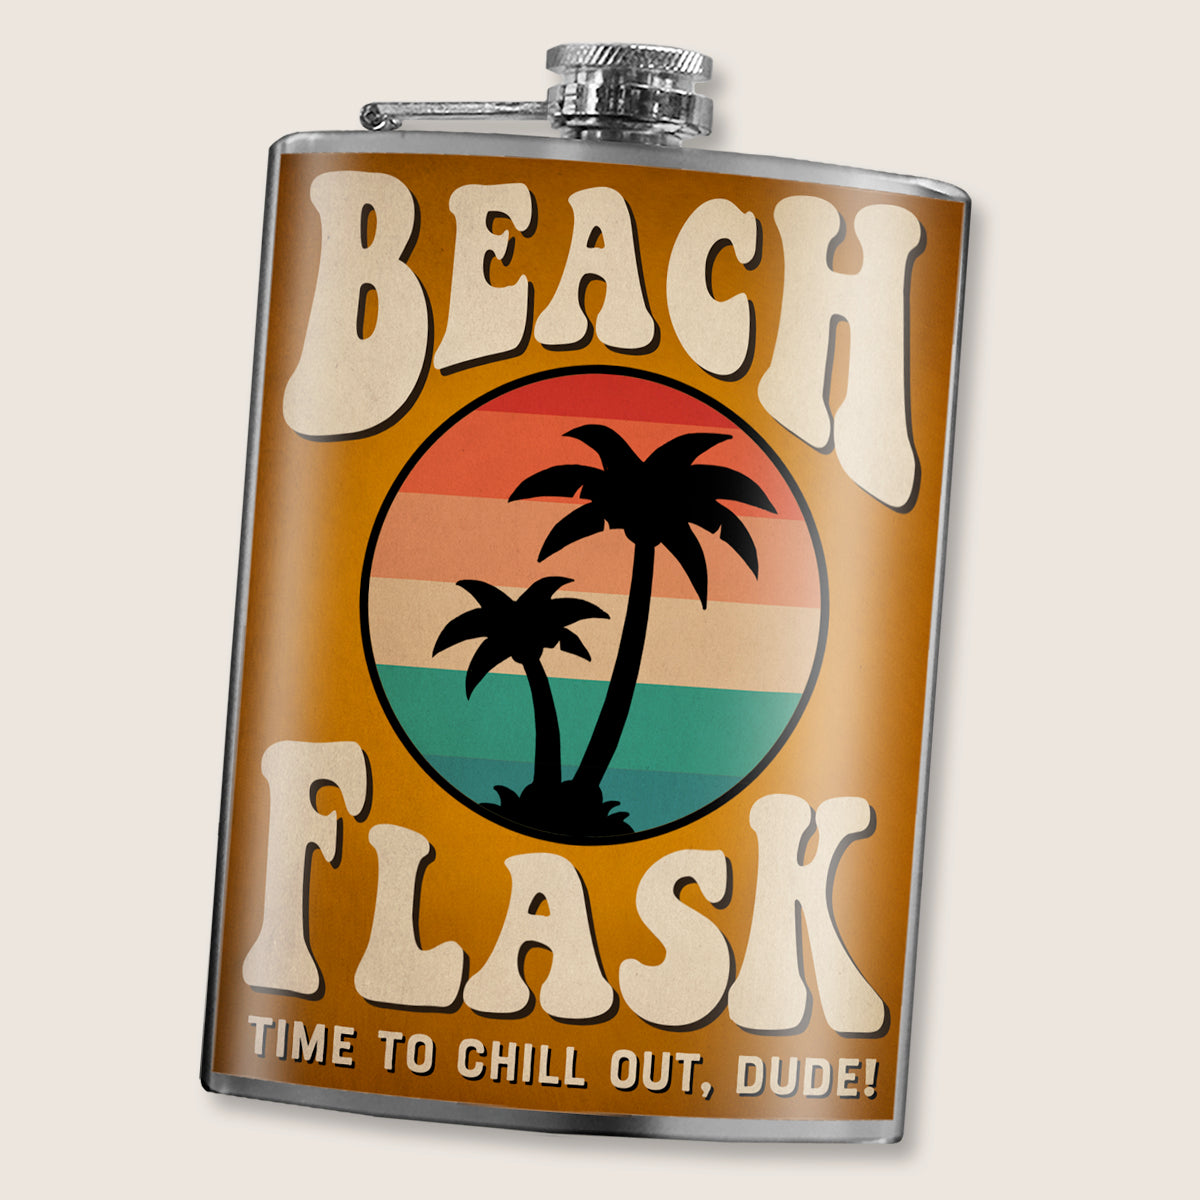 8 oz. Hip Flask: Beach Flask "Time to Chill Out, Dude!" Kick off every holiday or summer beach party with confidence. Cool stylish stainless steel drinking flask. Designed for durability and aesthetic appeal.